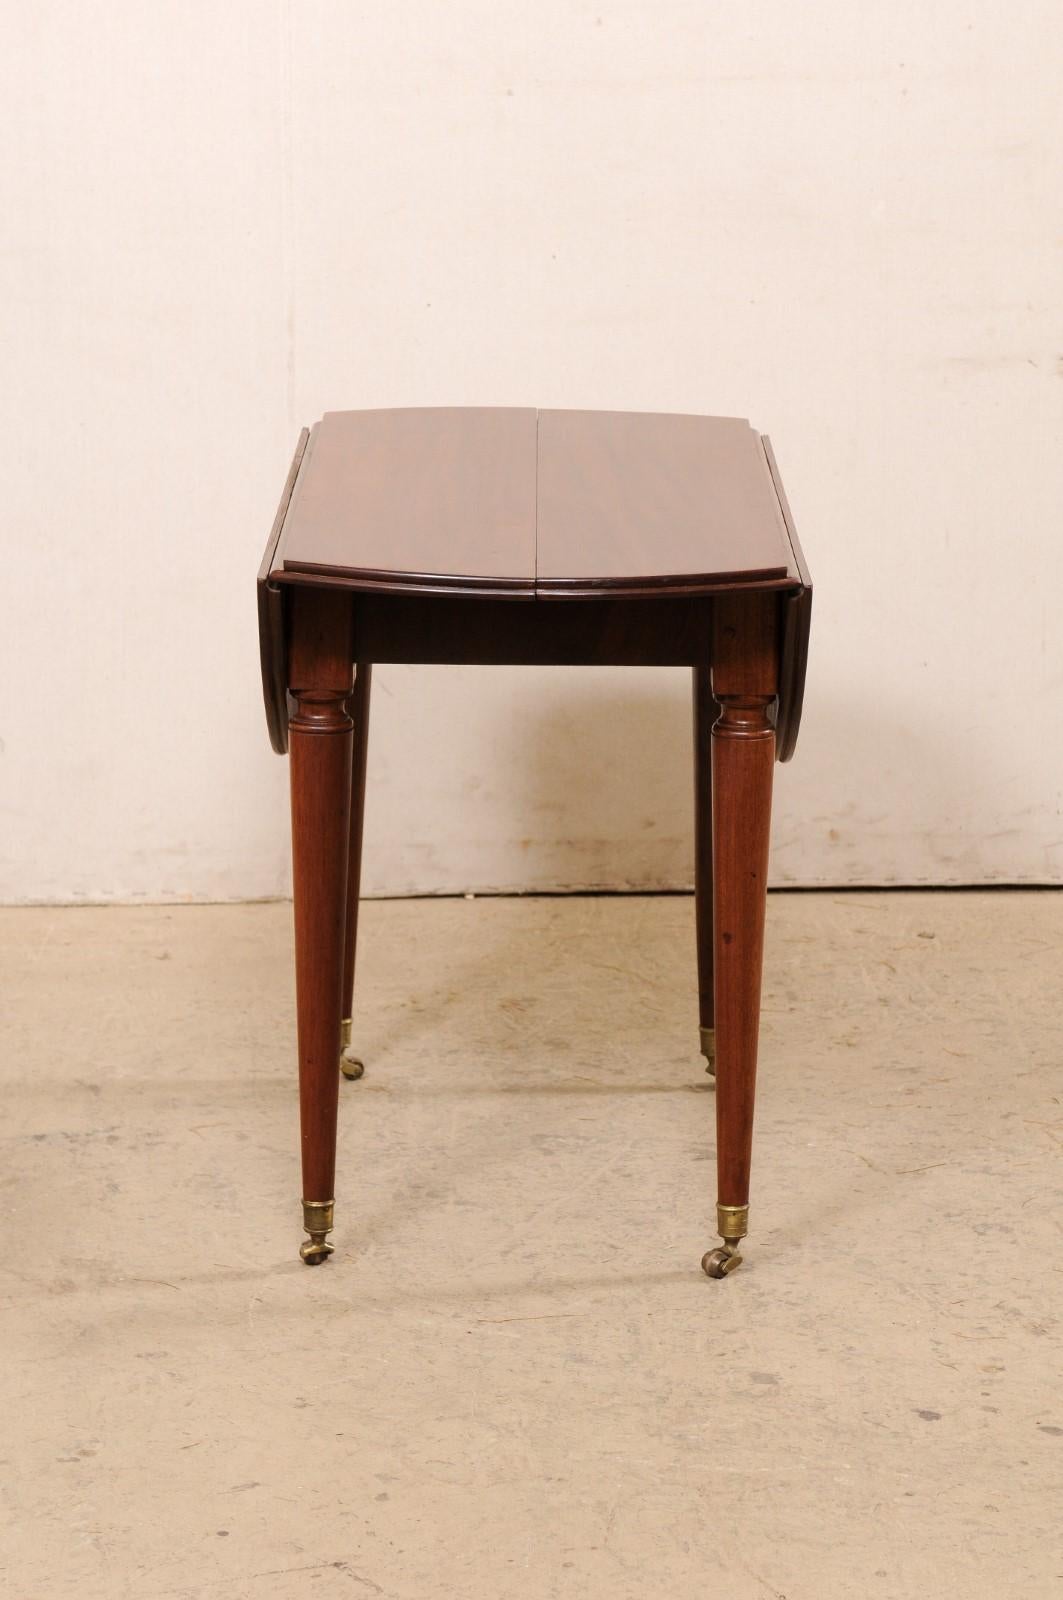 19th Century French 19th C. Mahogany Round Table W/Drop Leaves & Petite Brass Caster Feet For Sale